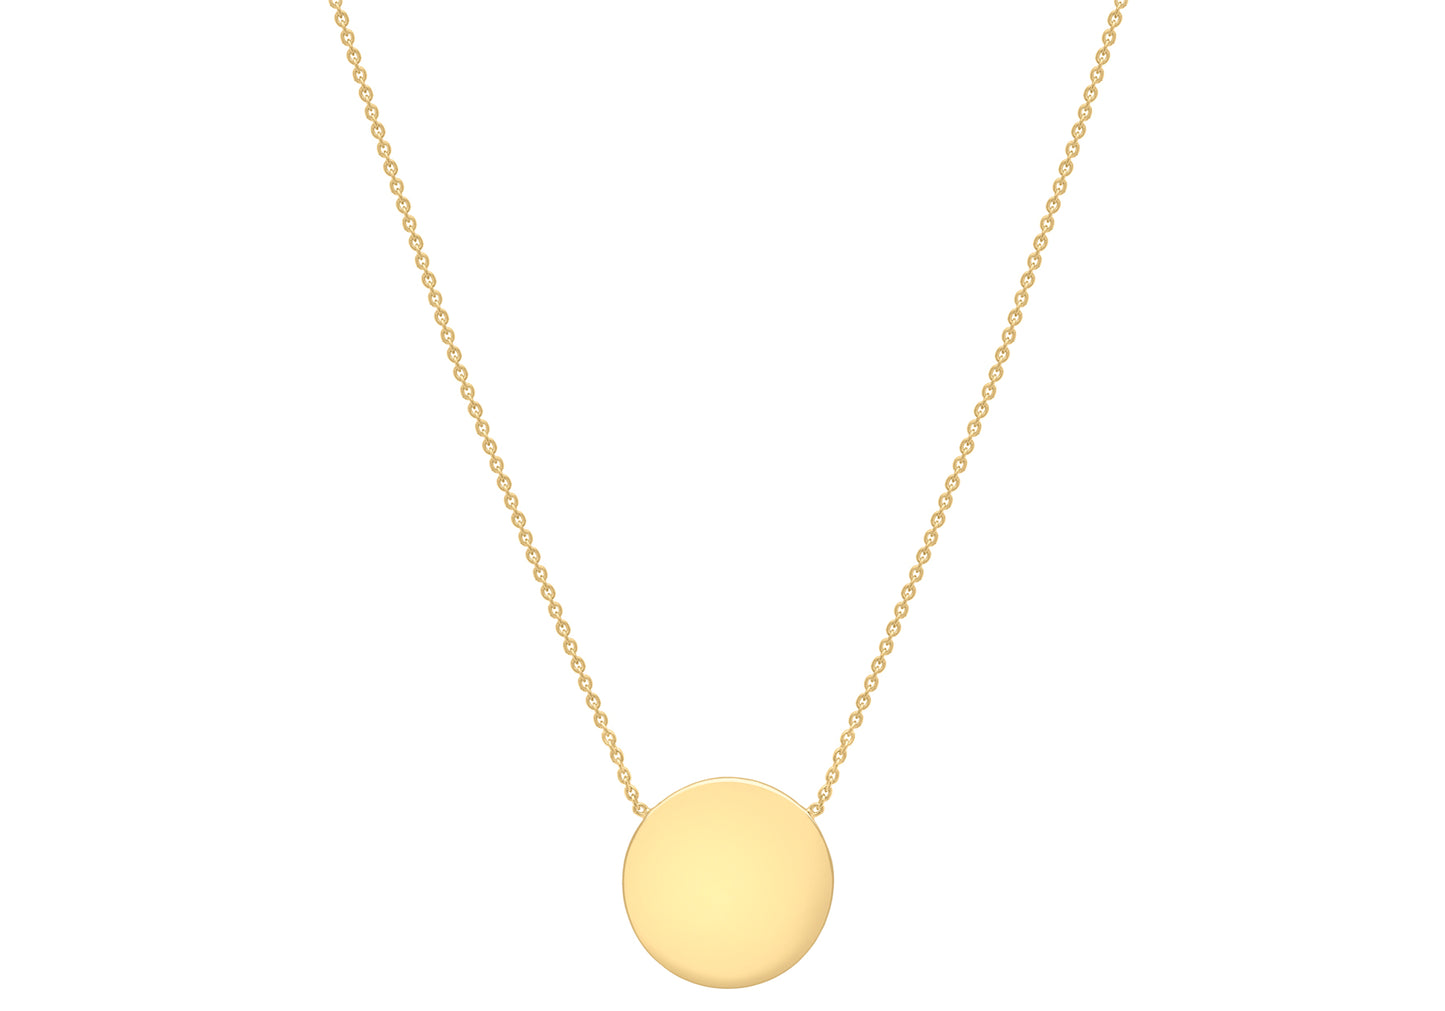 9ct Yellow Gold 15mm Disc Pendant Adjustable Necklace